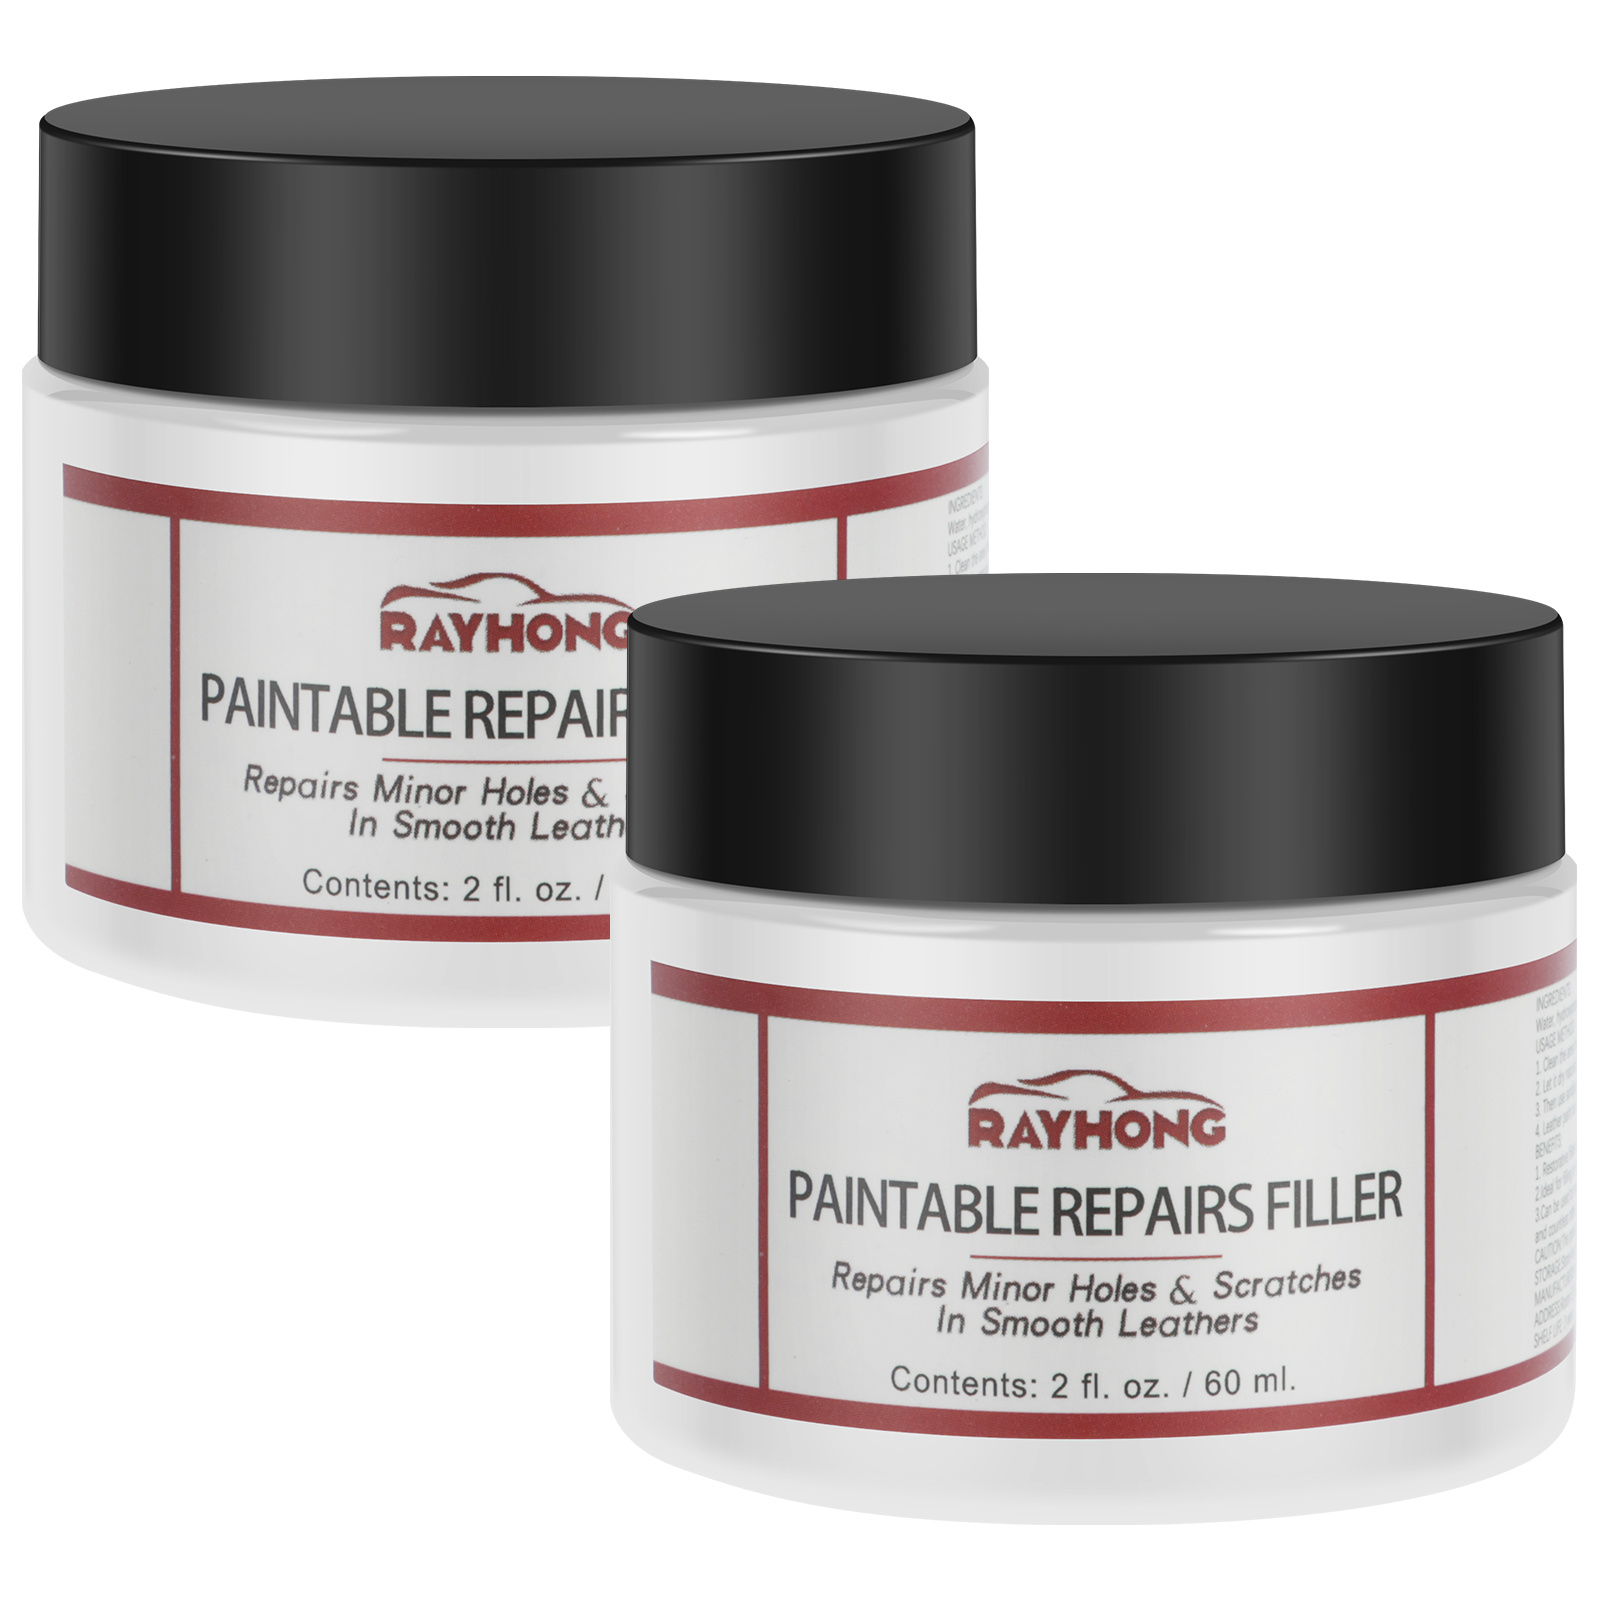 Leather filler paste to enhance the natural features of leather